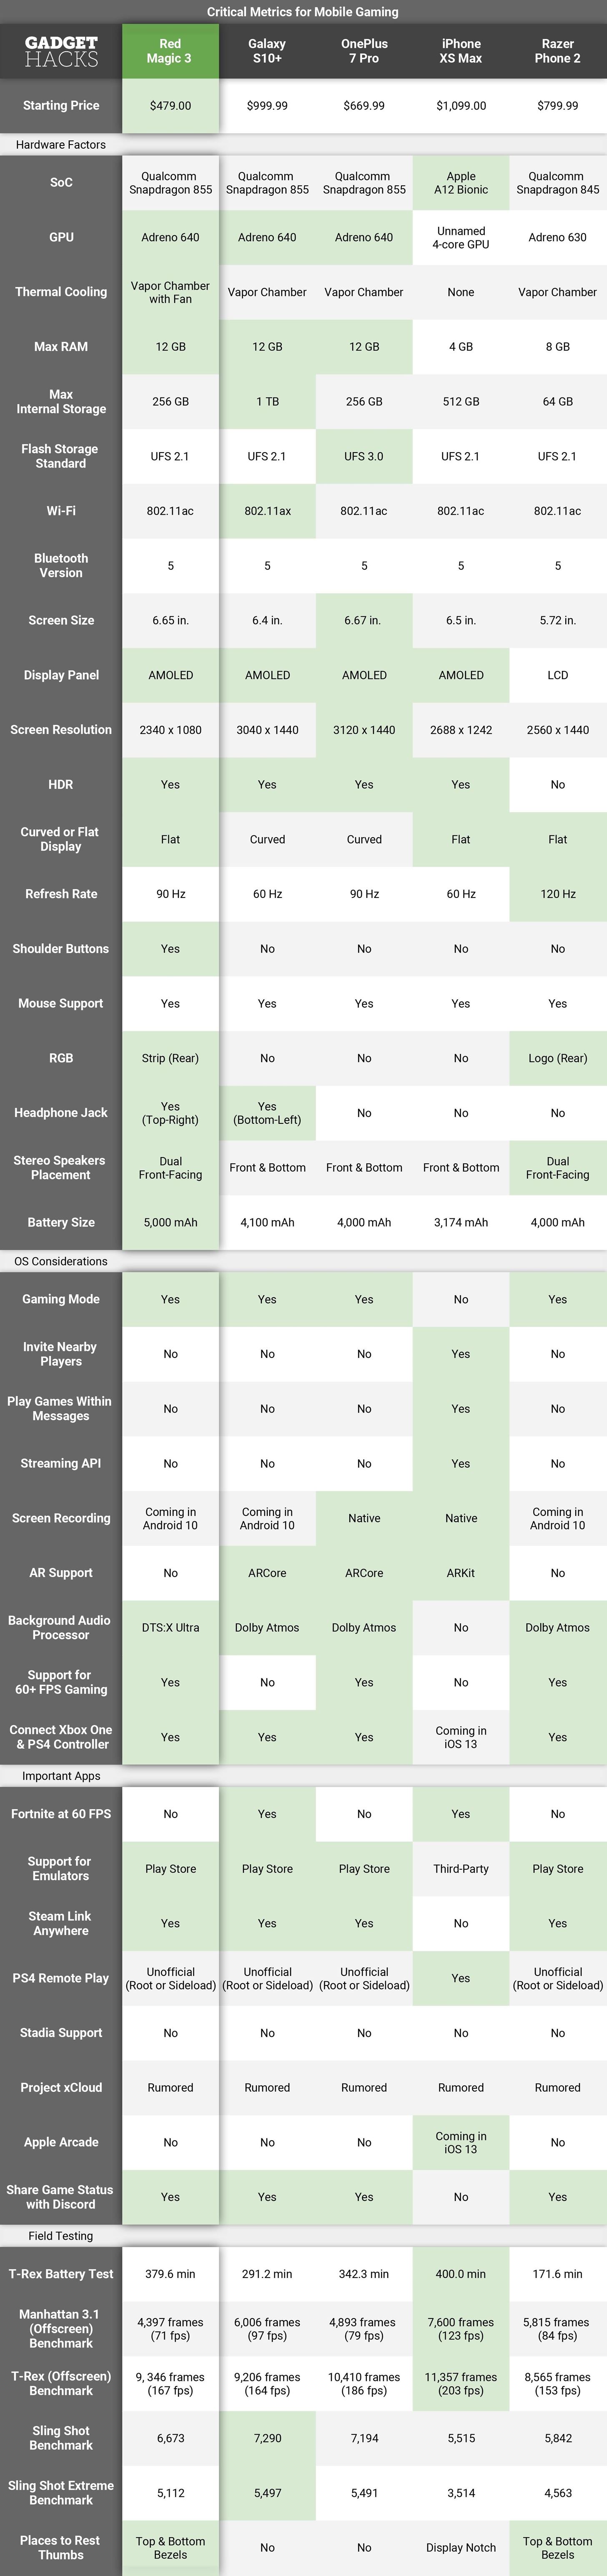 Comparing Different Processor Series for Gaming on Mobile